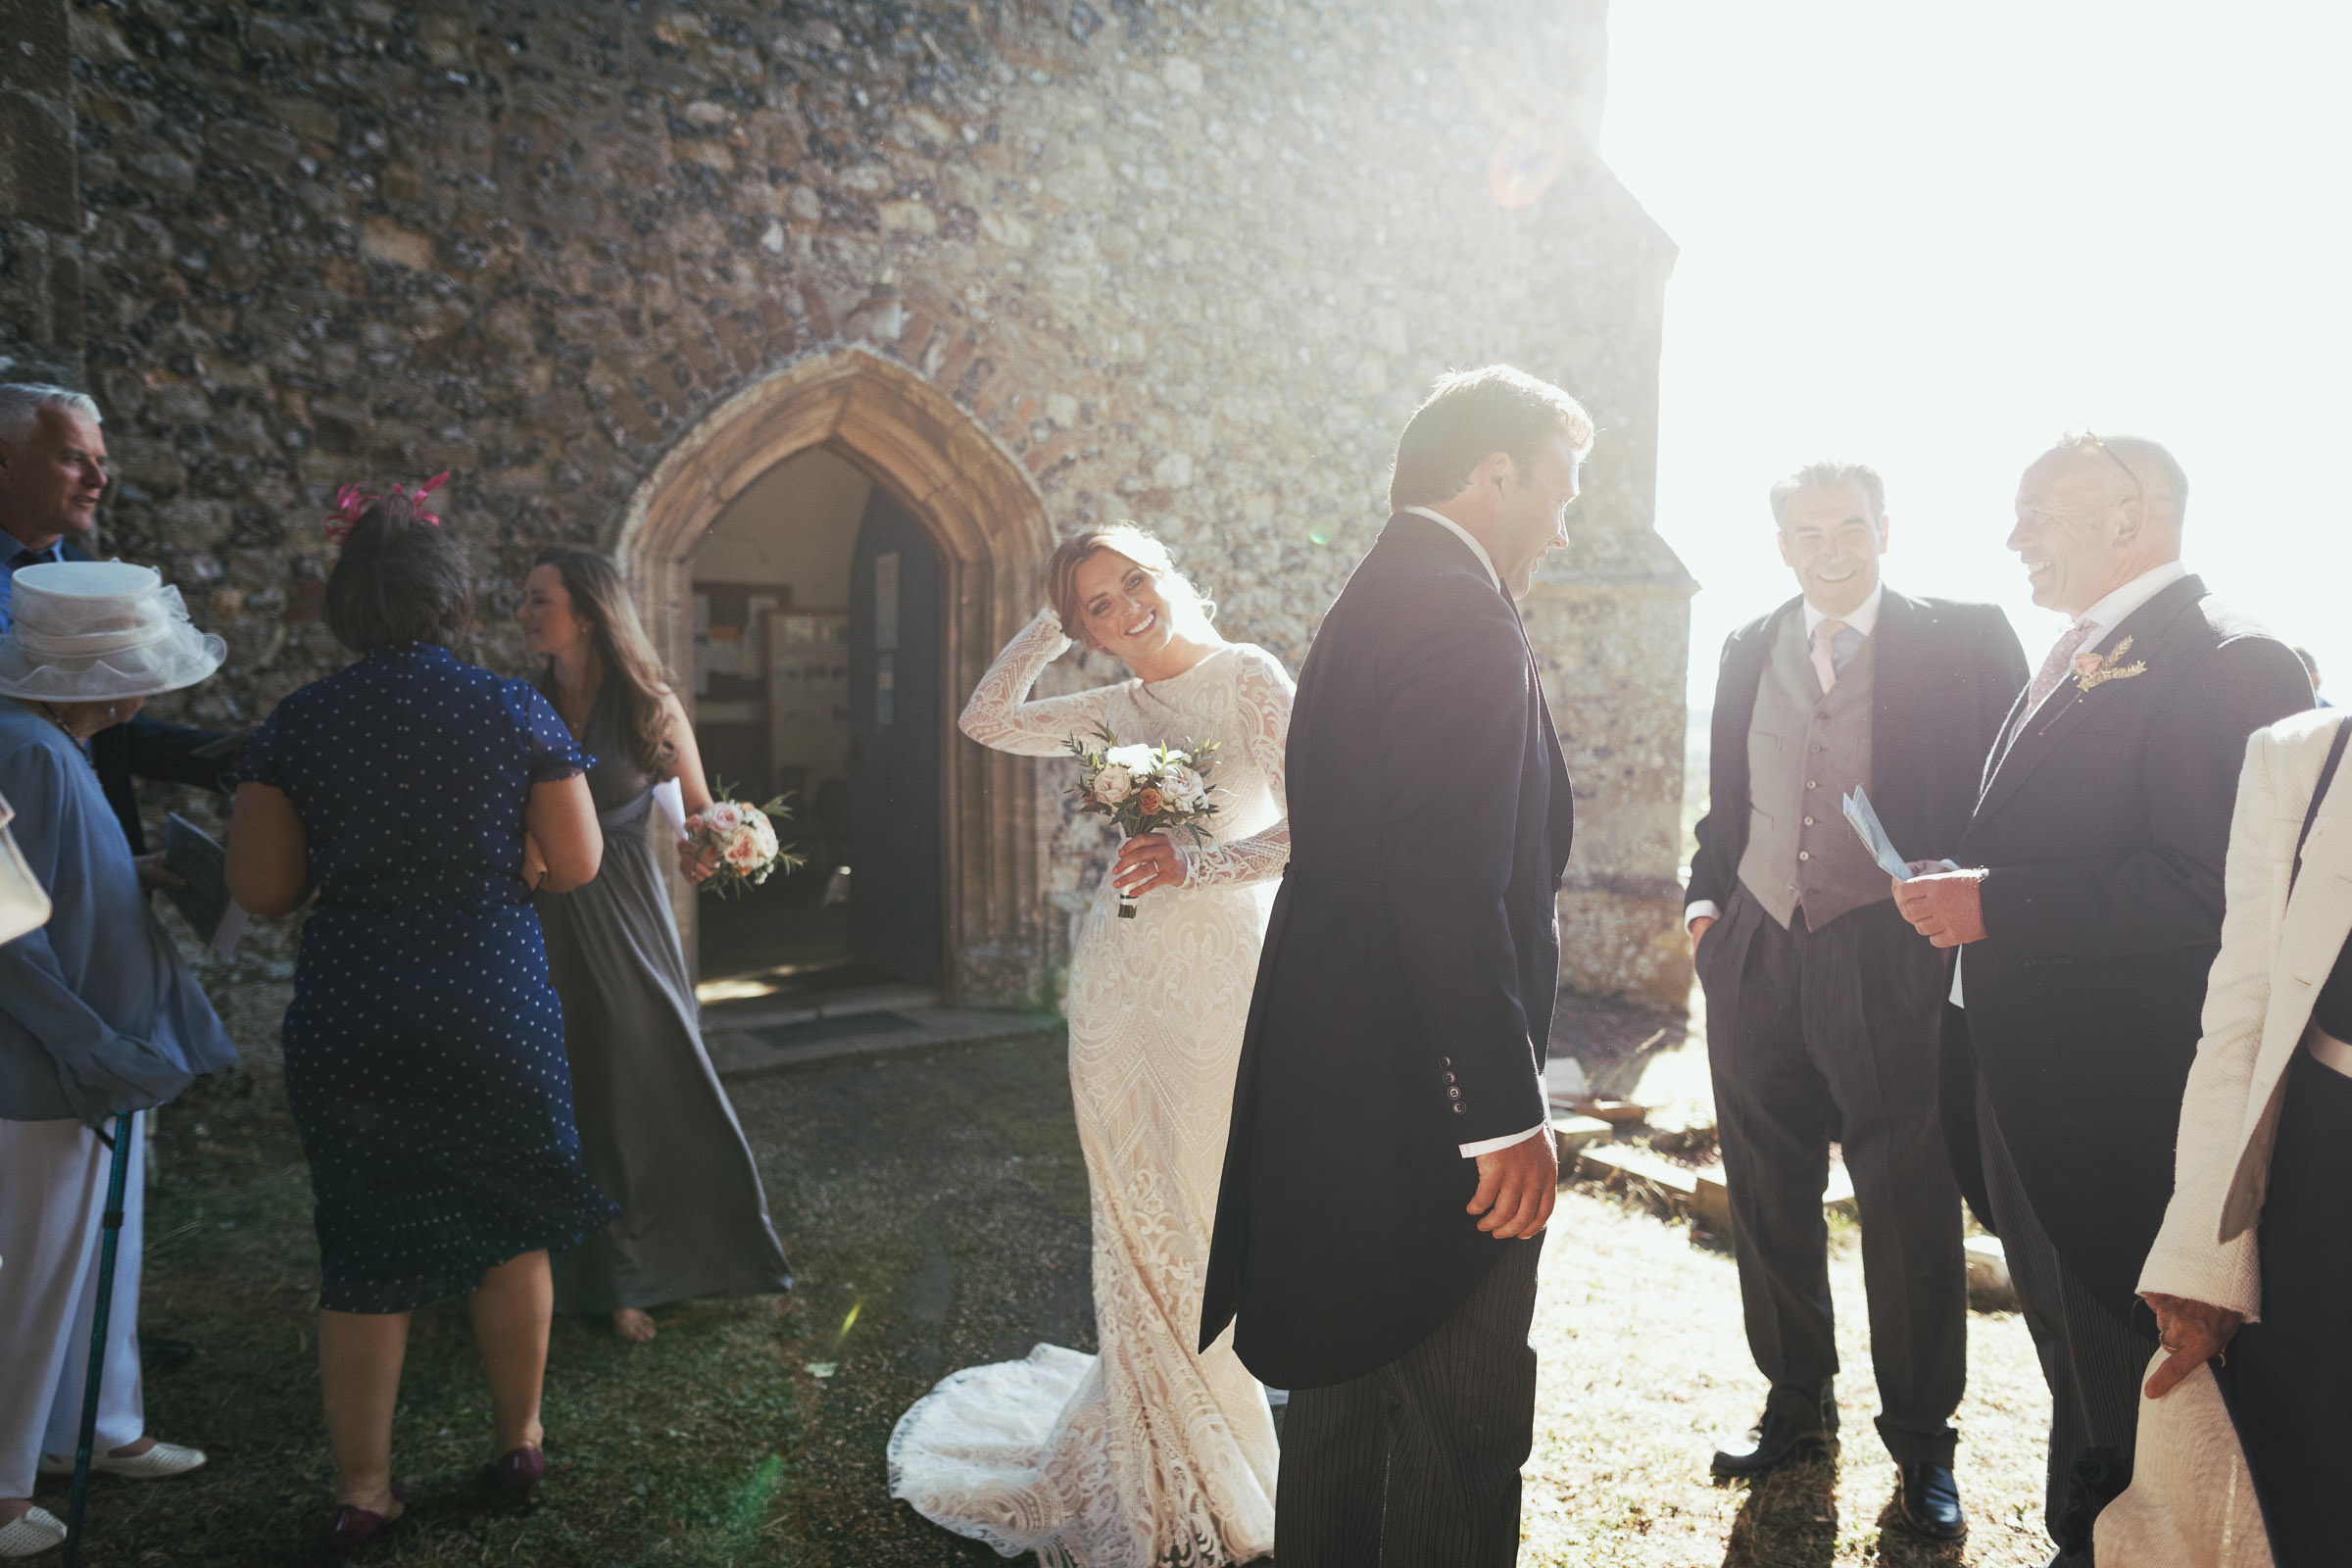 Wedding guests are chatting to each other but the bride is looking at the camera, illuminated by the sunlight. The door of The Church of St Mary & St Margaret in Stow Maries is behind her. She is wearing a long lace wedding dress with long sleeves.